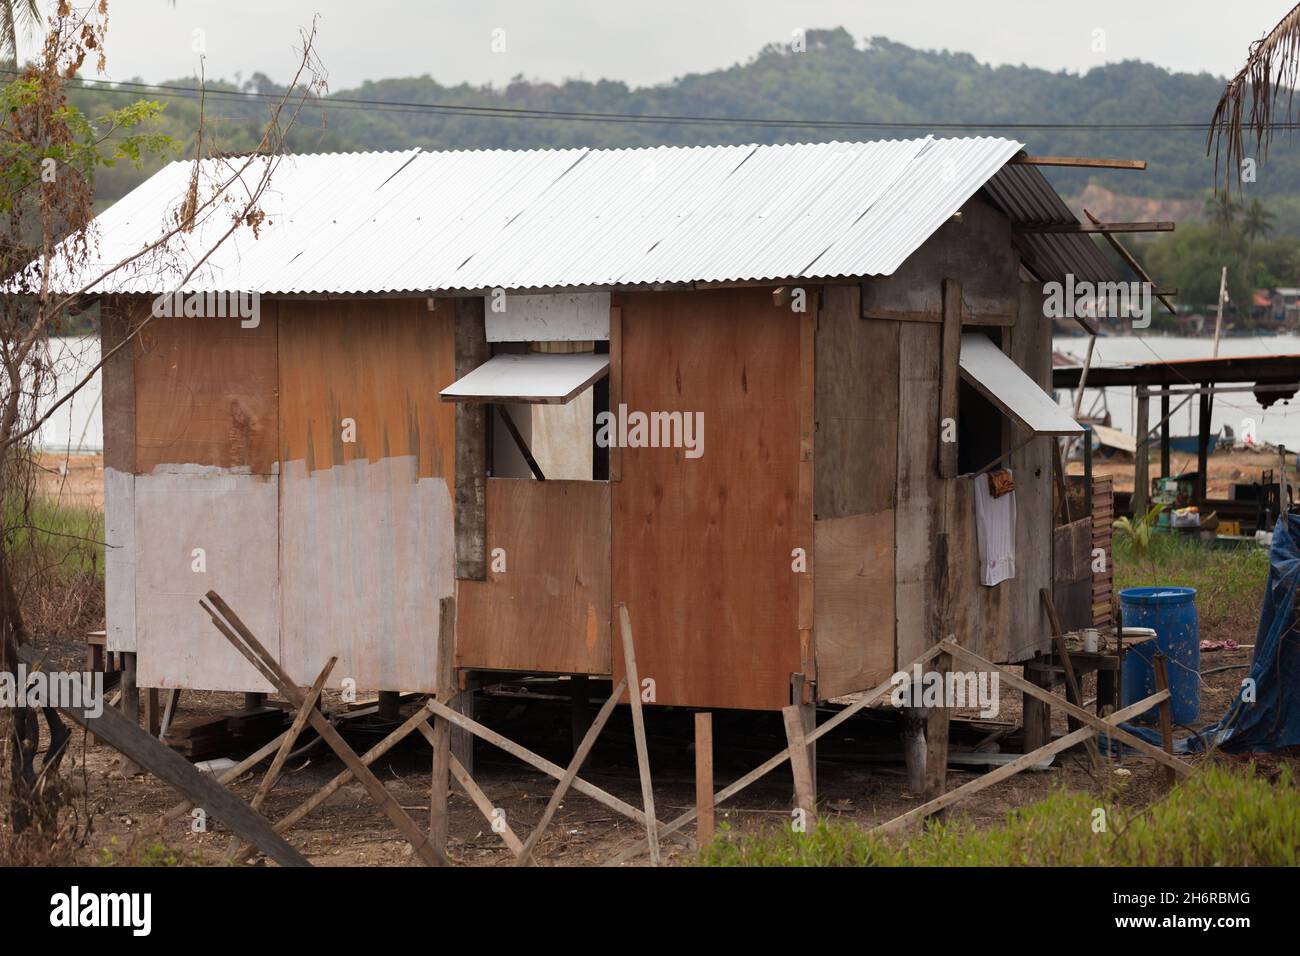 Kota Kinabalu, Malaysia - March 23, 2019: Poor wooden house stands on the coast of Mengkabong River Stock Photo